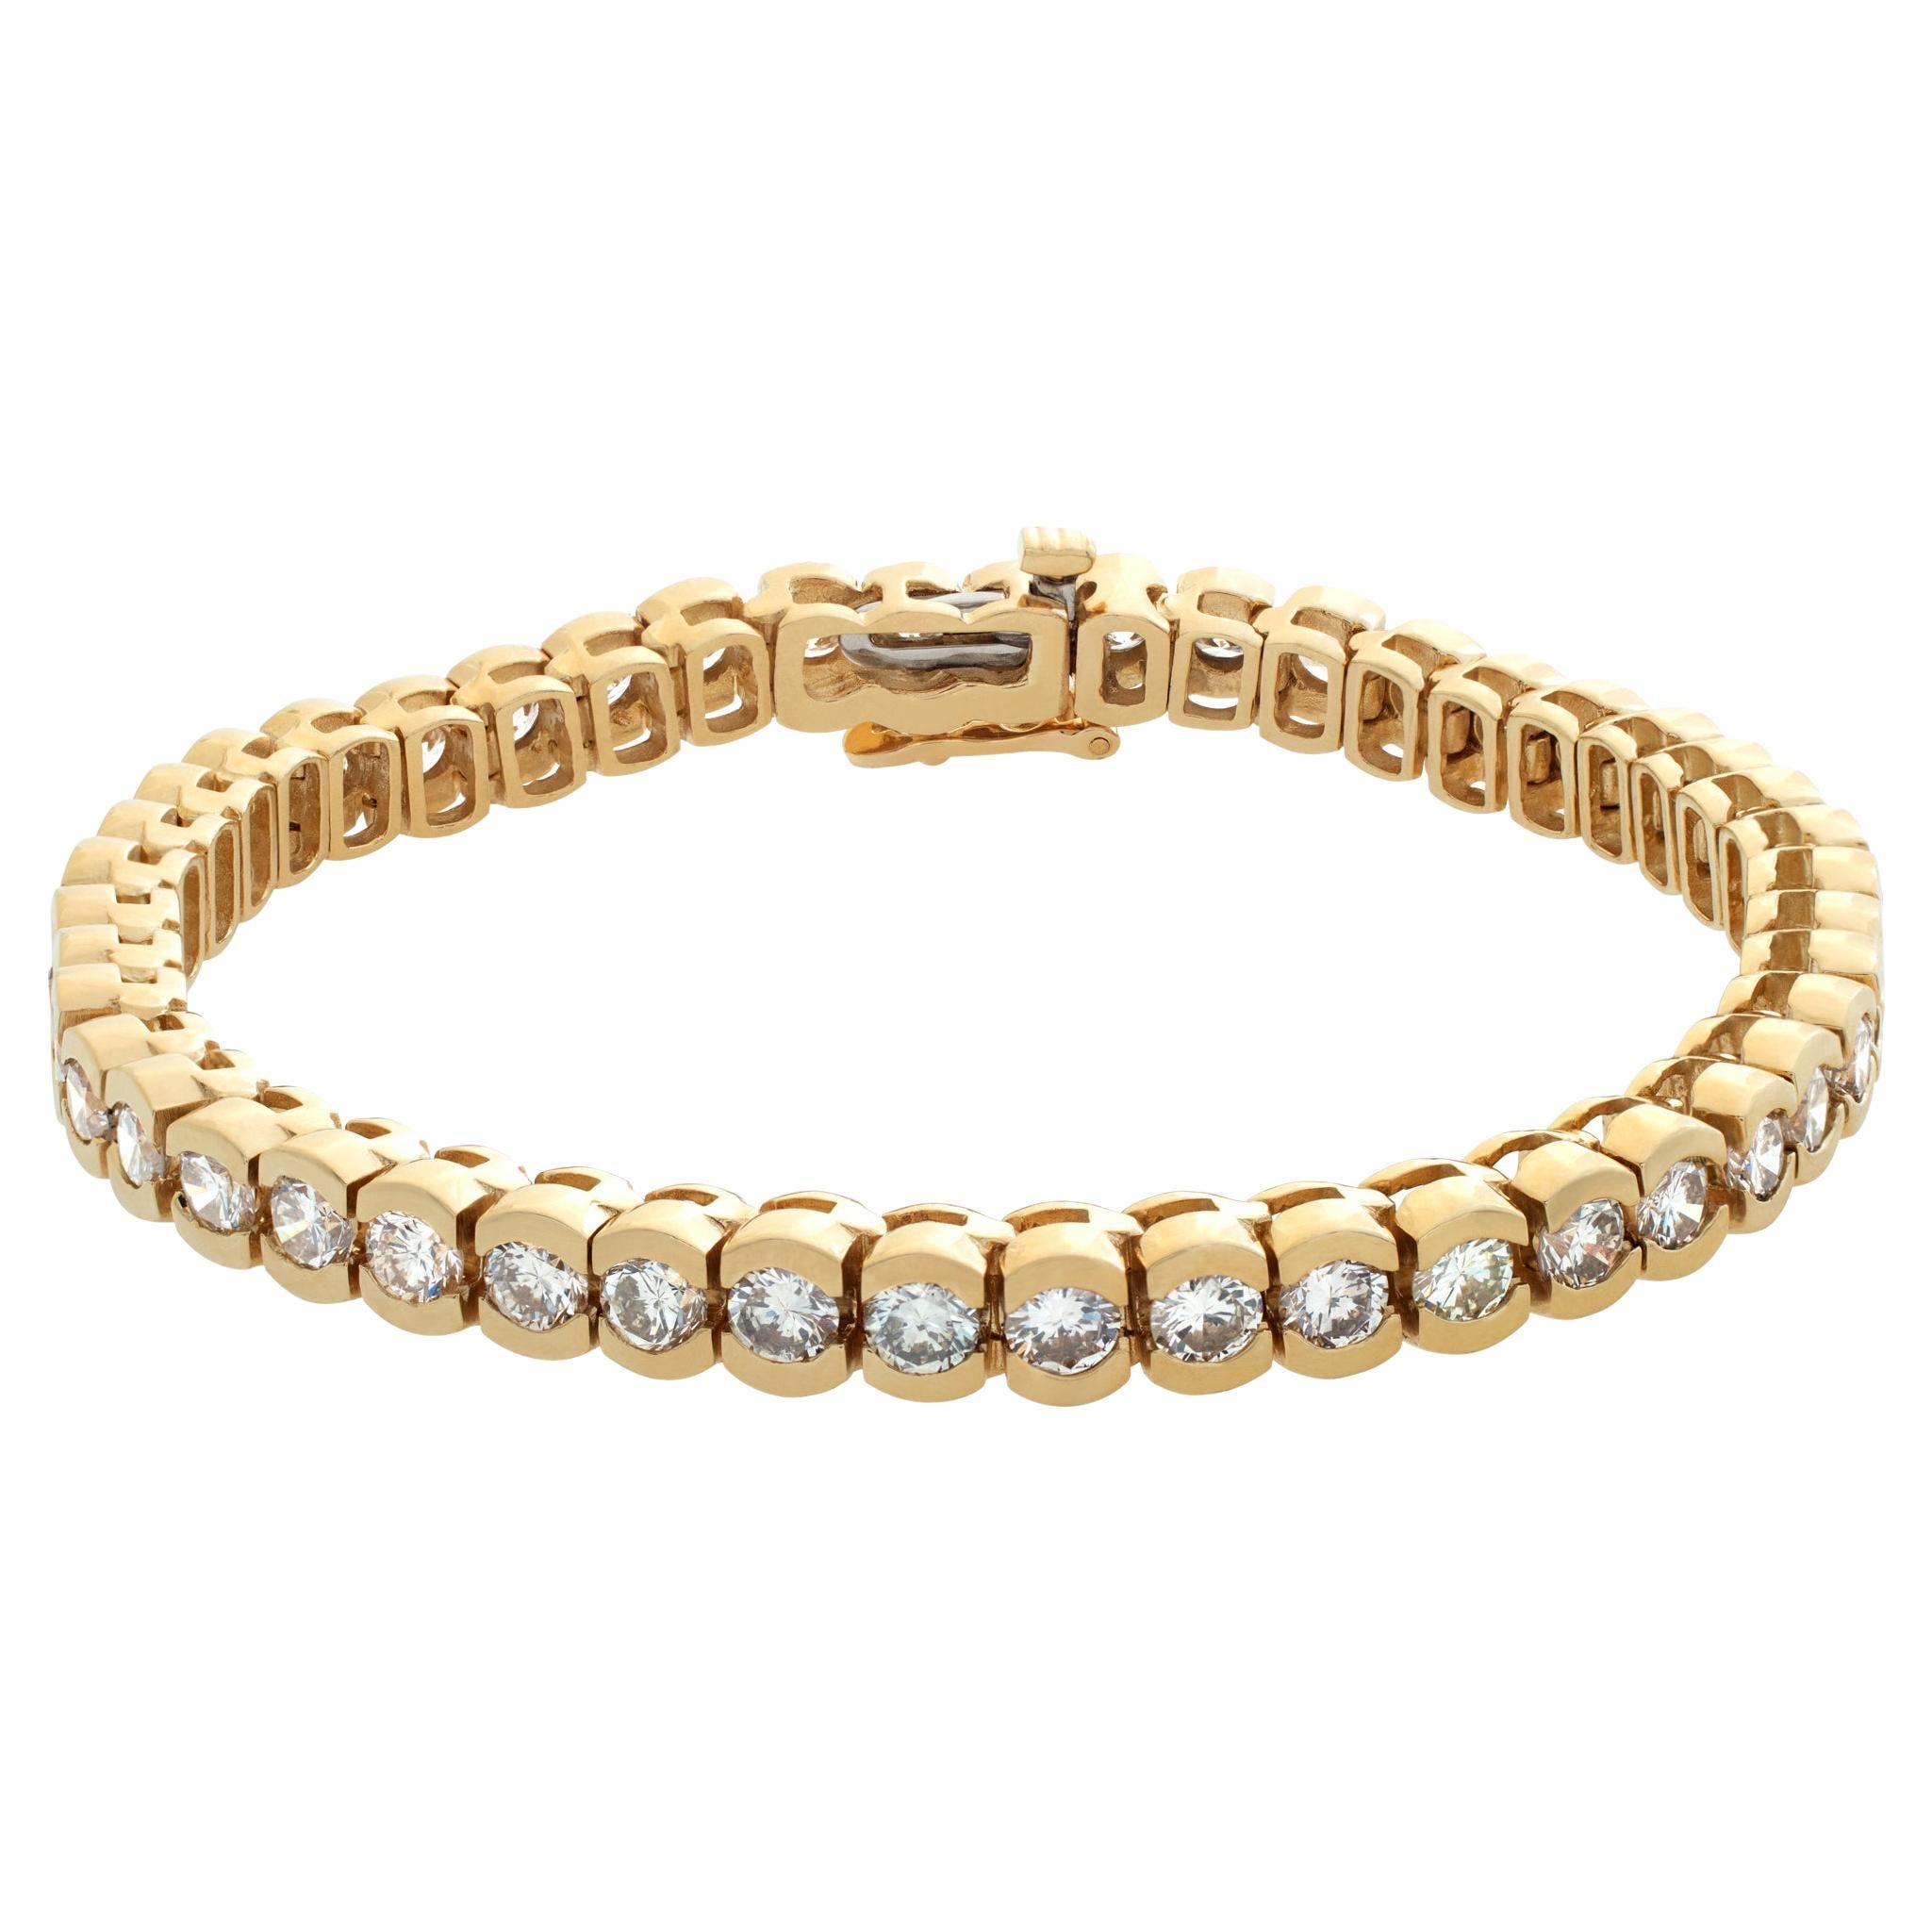 Diamond line bracelet in 14k yellow gold with over 7 carats in round diamonds